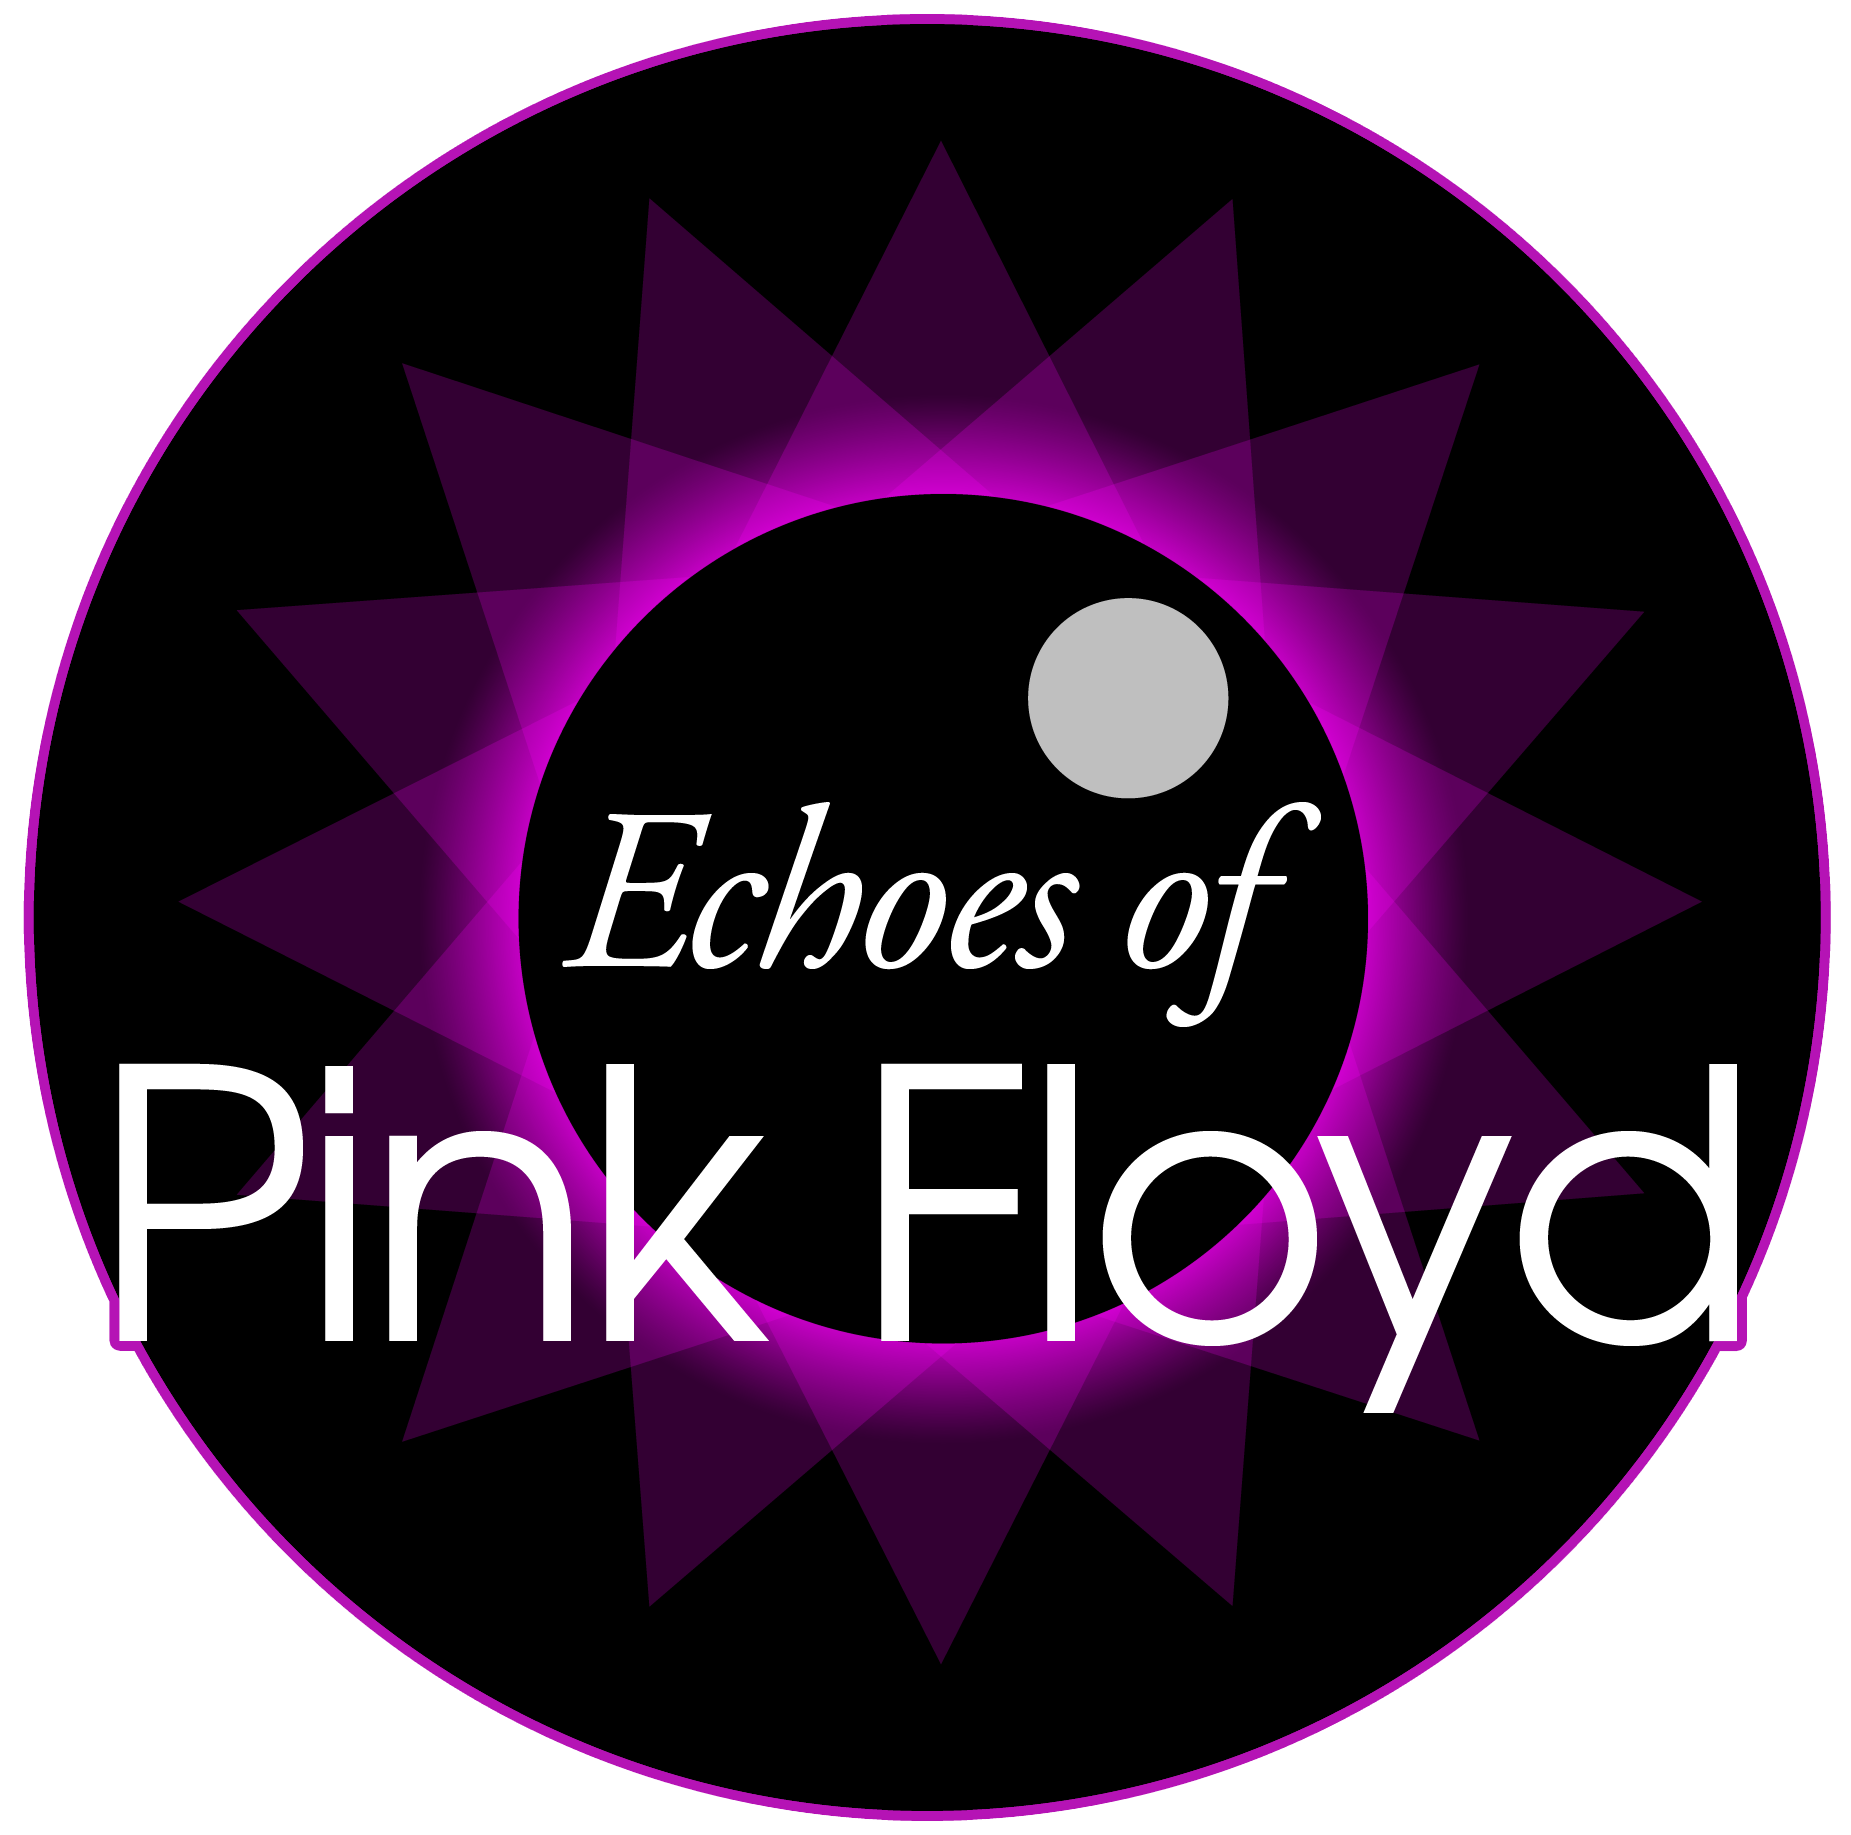 Echoes of Pink Floyd